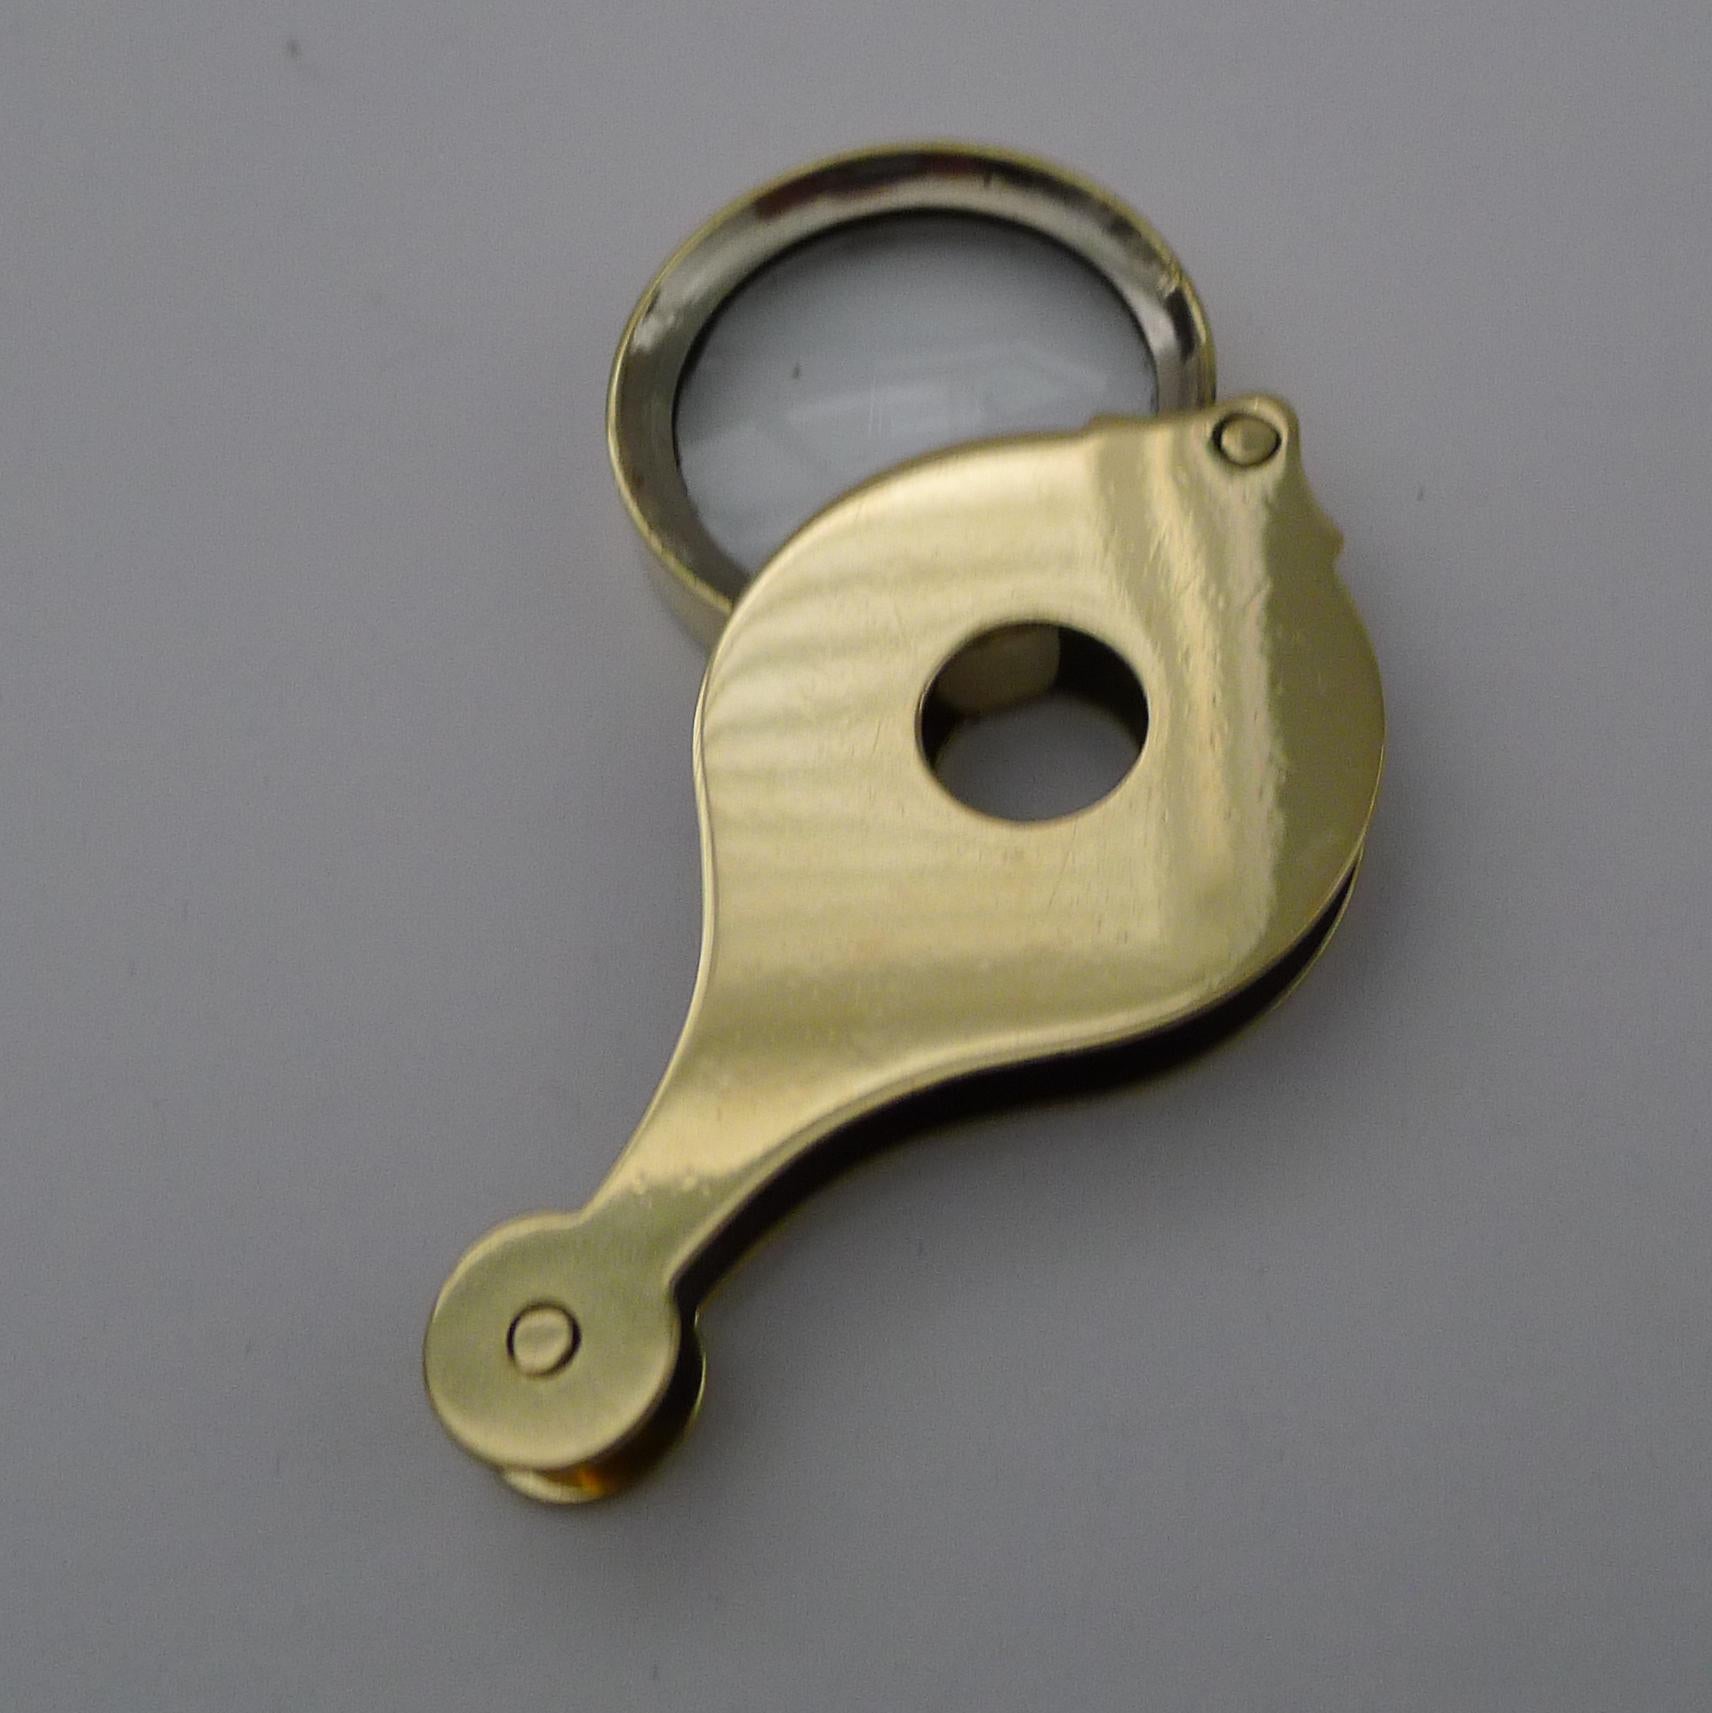 An unusual Edwardian Folding magnifying glass, the polished brass case having a hole in the centre allowing it to picked up and the magnifying glass being able to be used looking through the hole. If a larger magnifier is required, it can be